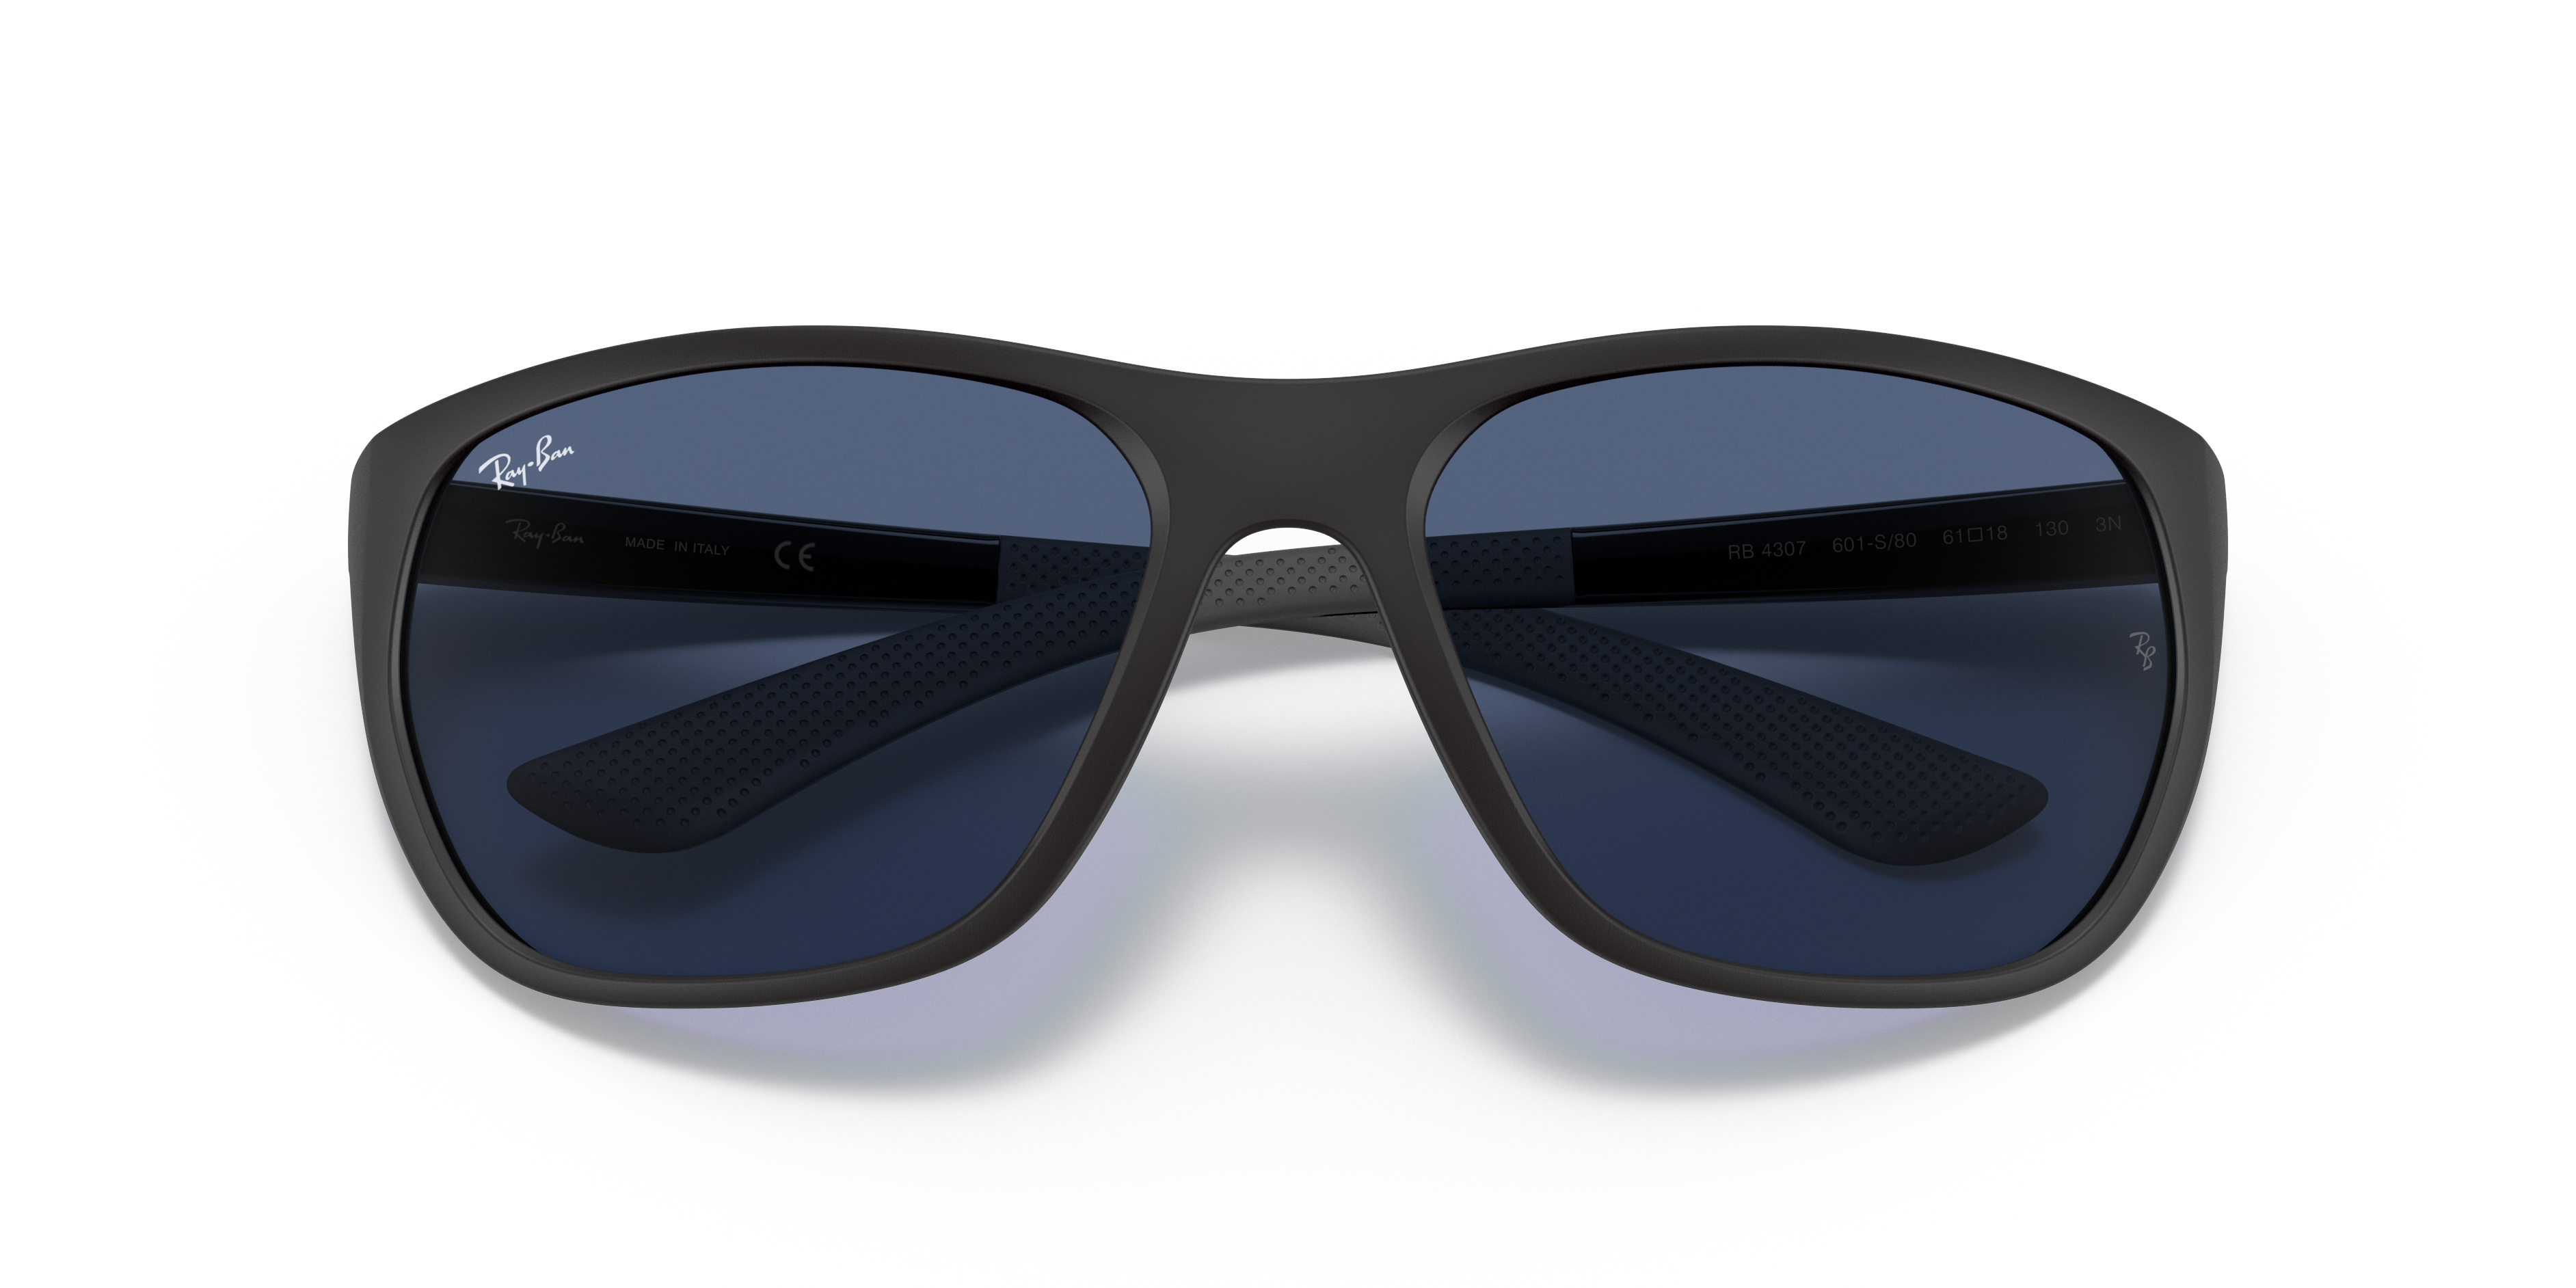 Rb4307 Sunglasses in Black and Dark Blue | Ray-Ban®